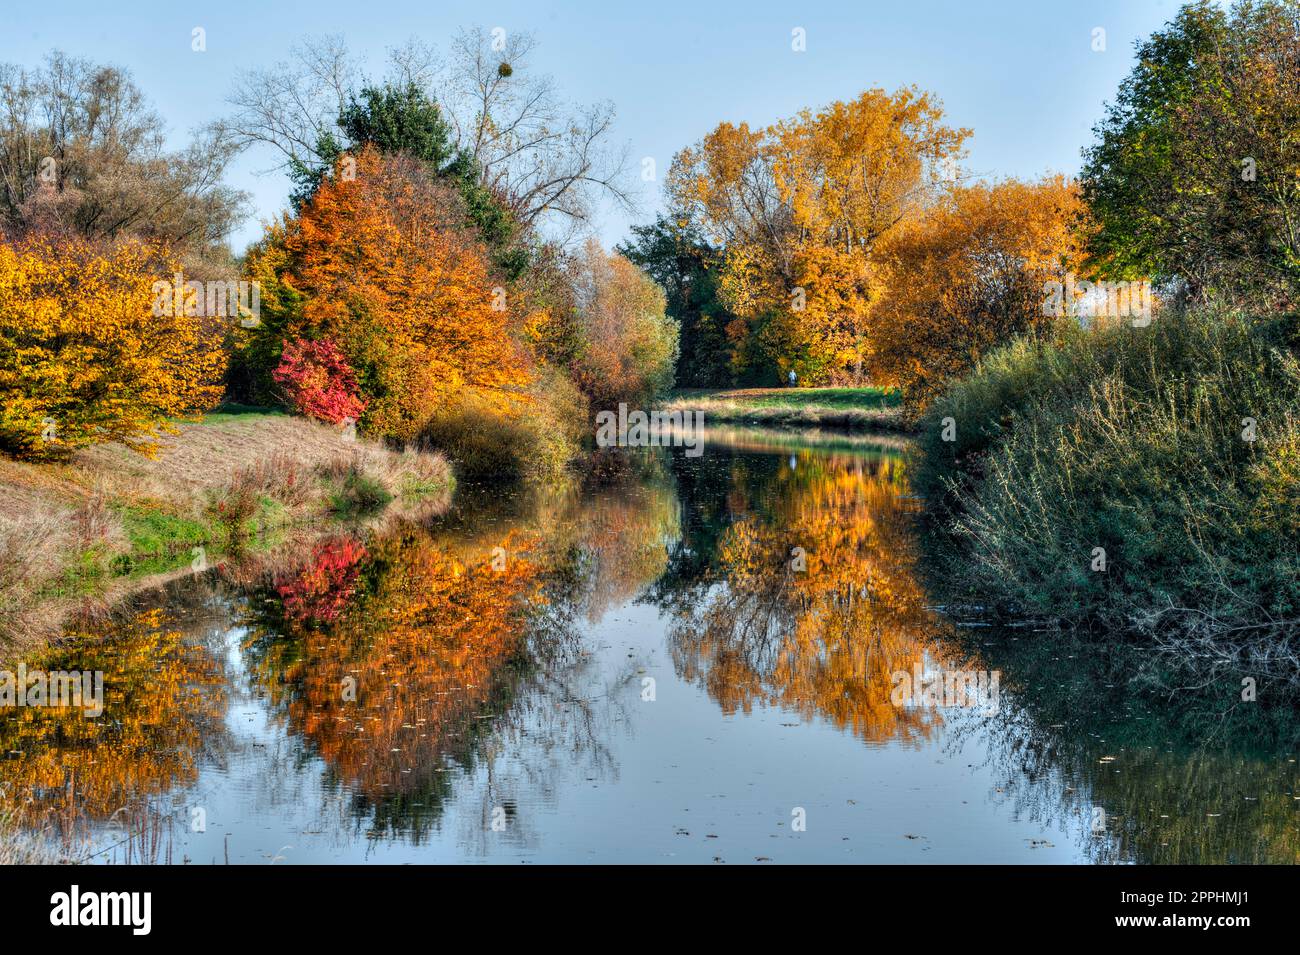 Autumn atmosphere on the river Nidda in Frankfurt am Main with colourfully coloured deciduous trees and shrubs on the river bank Stock Photo